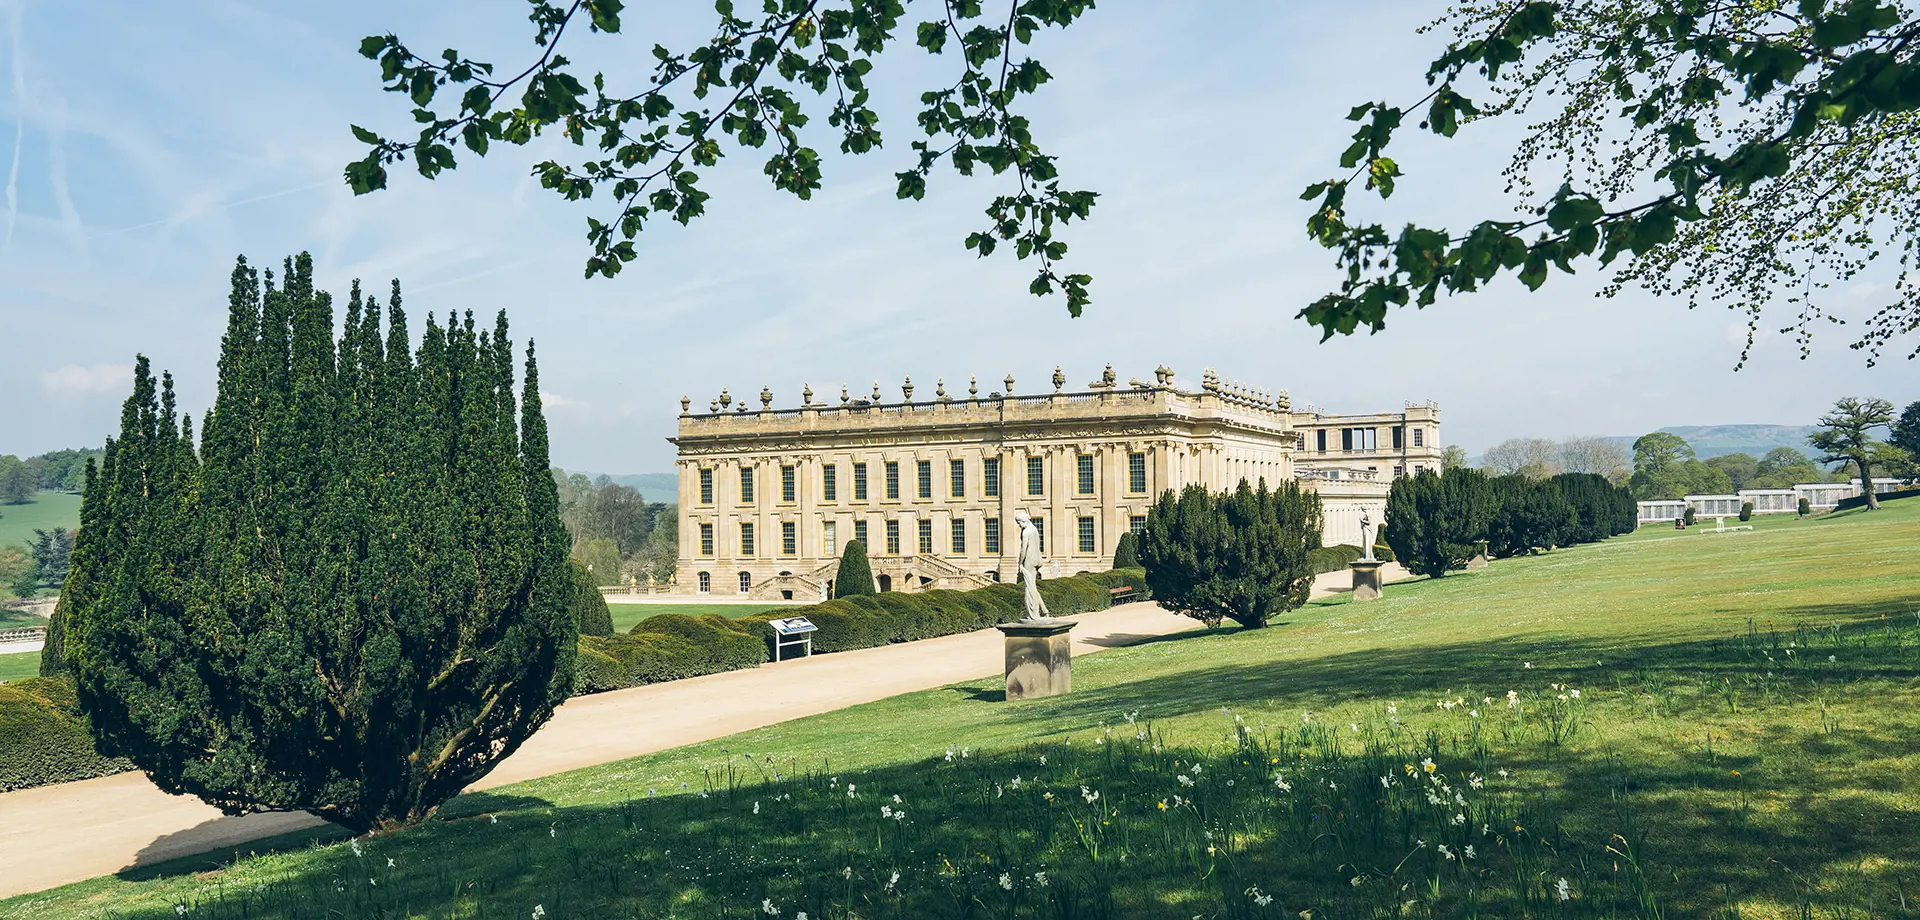 Chatsworth as a location